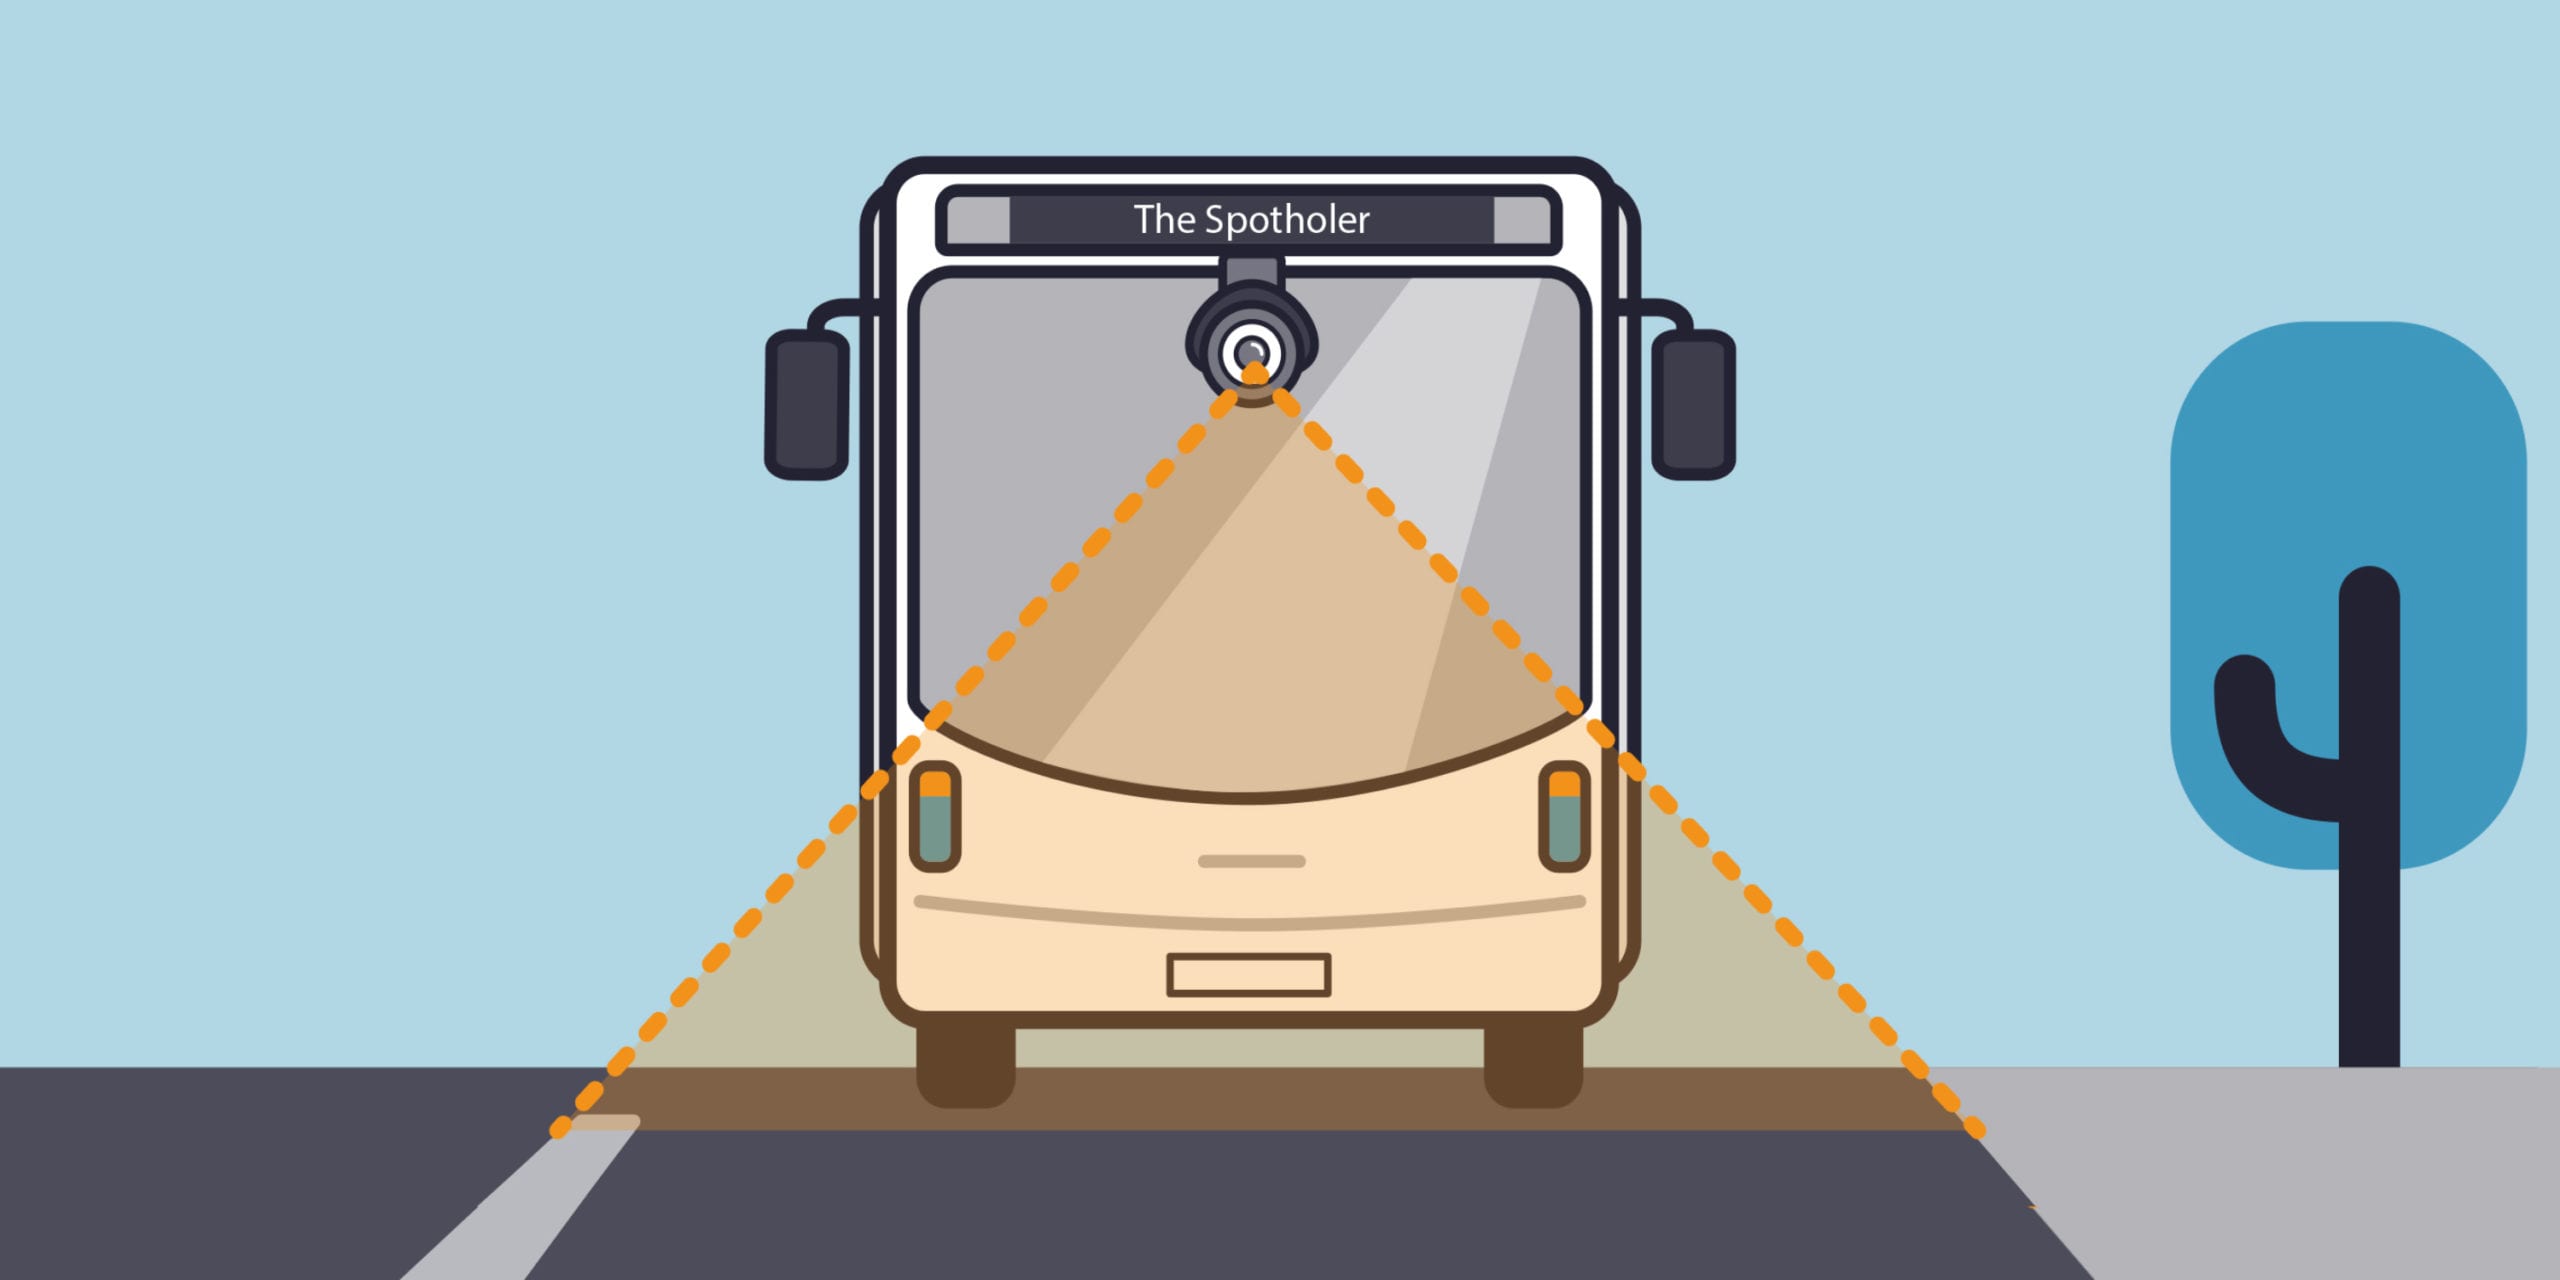 Frame from the Pothole Spotter animation showing the spotter mounted on the front of a bus